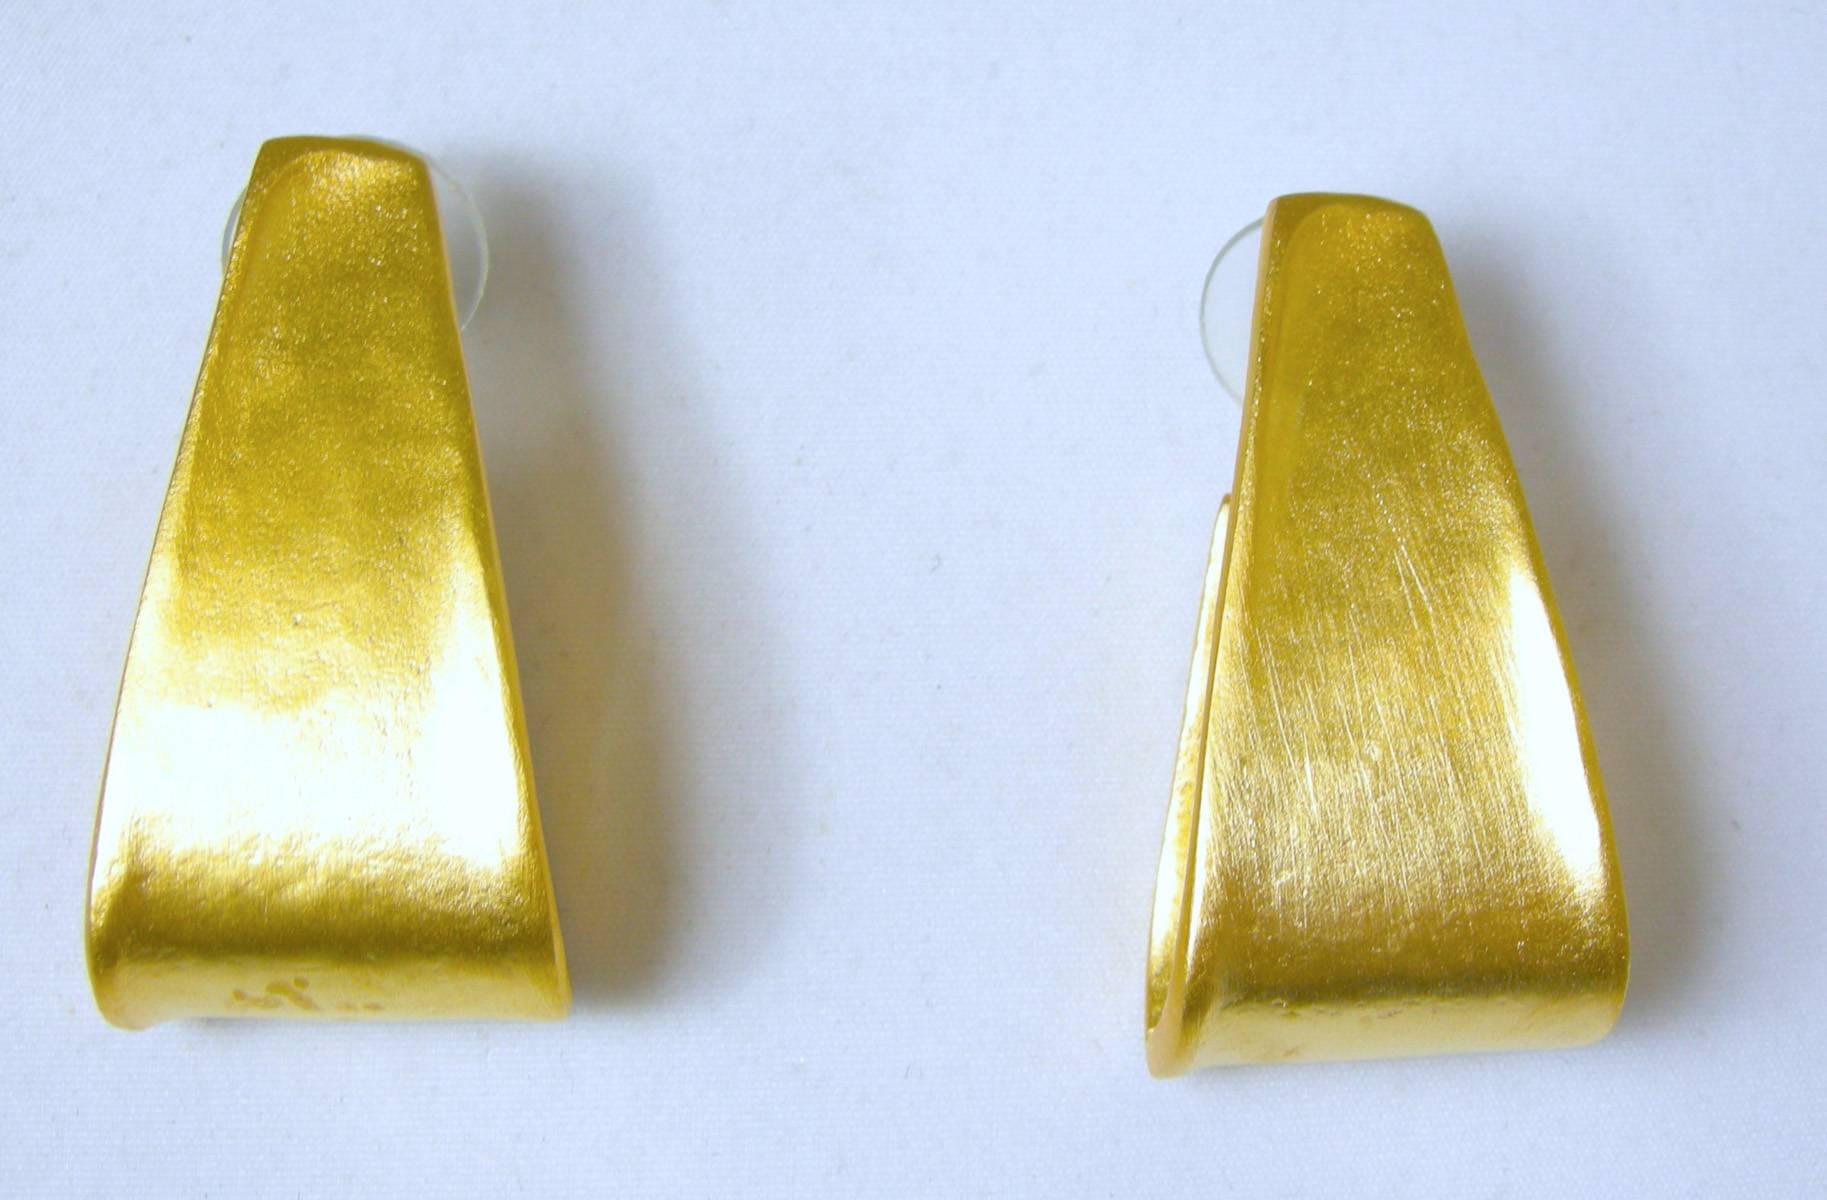 These  Kenneth Jay Lane earrings feature a mottled 2-sided design in a gold-tone setting.  In excellent condition, these pierced earrings measure 1 5/8” x 3/4” and are stamped “Kenneth Lane”.